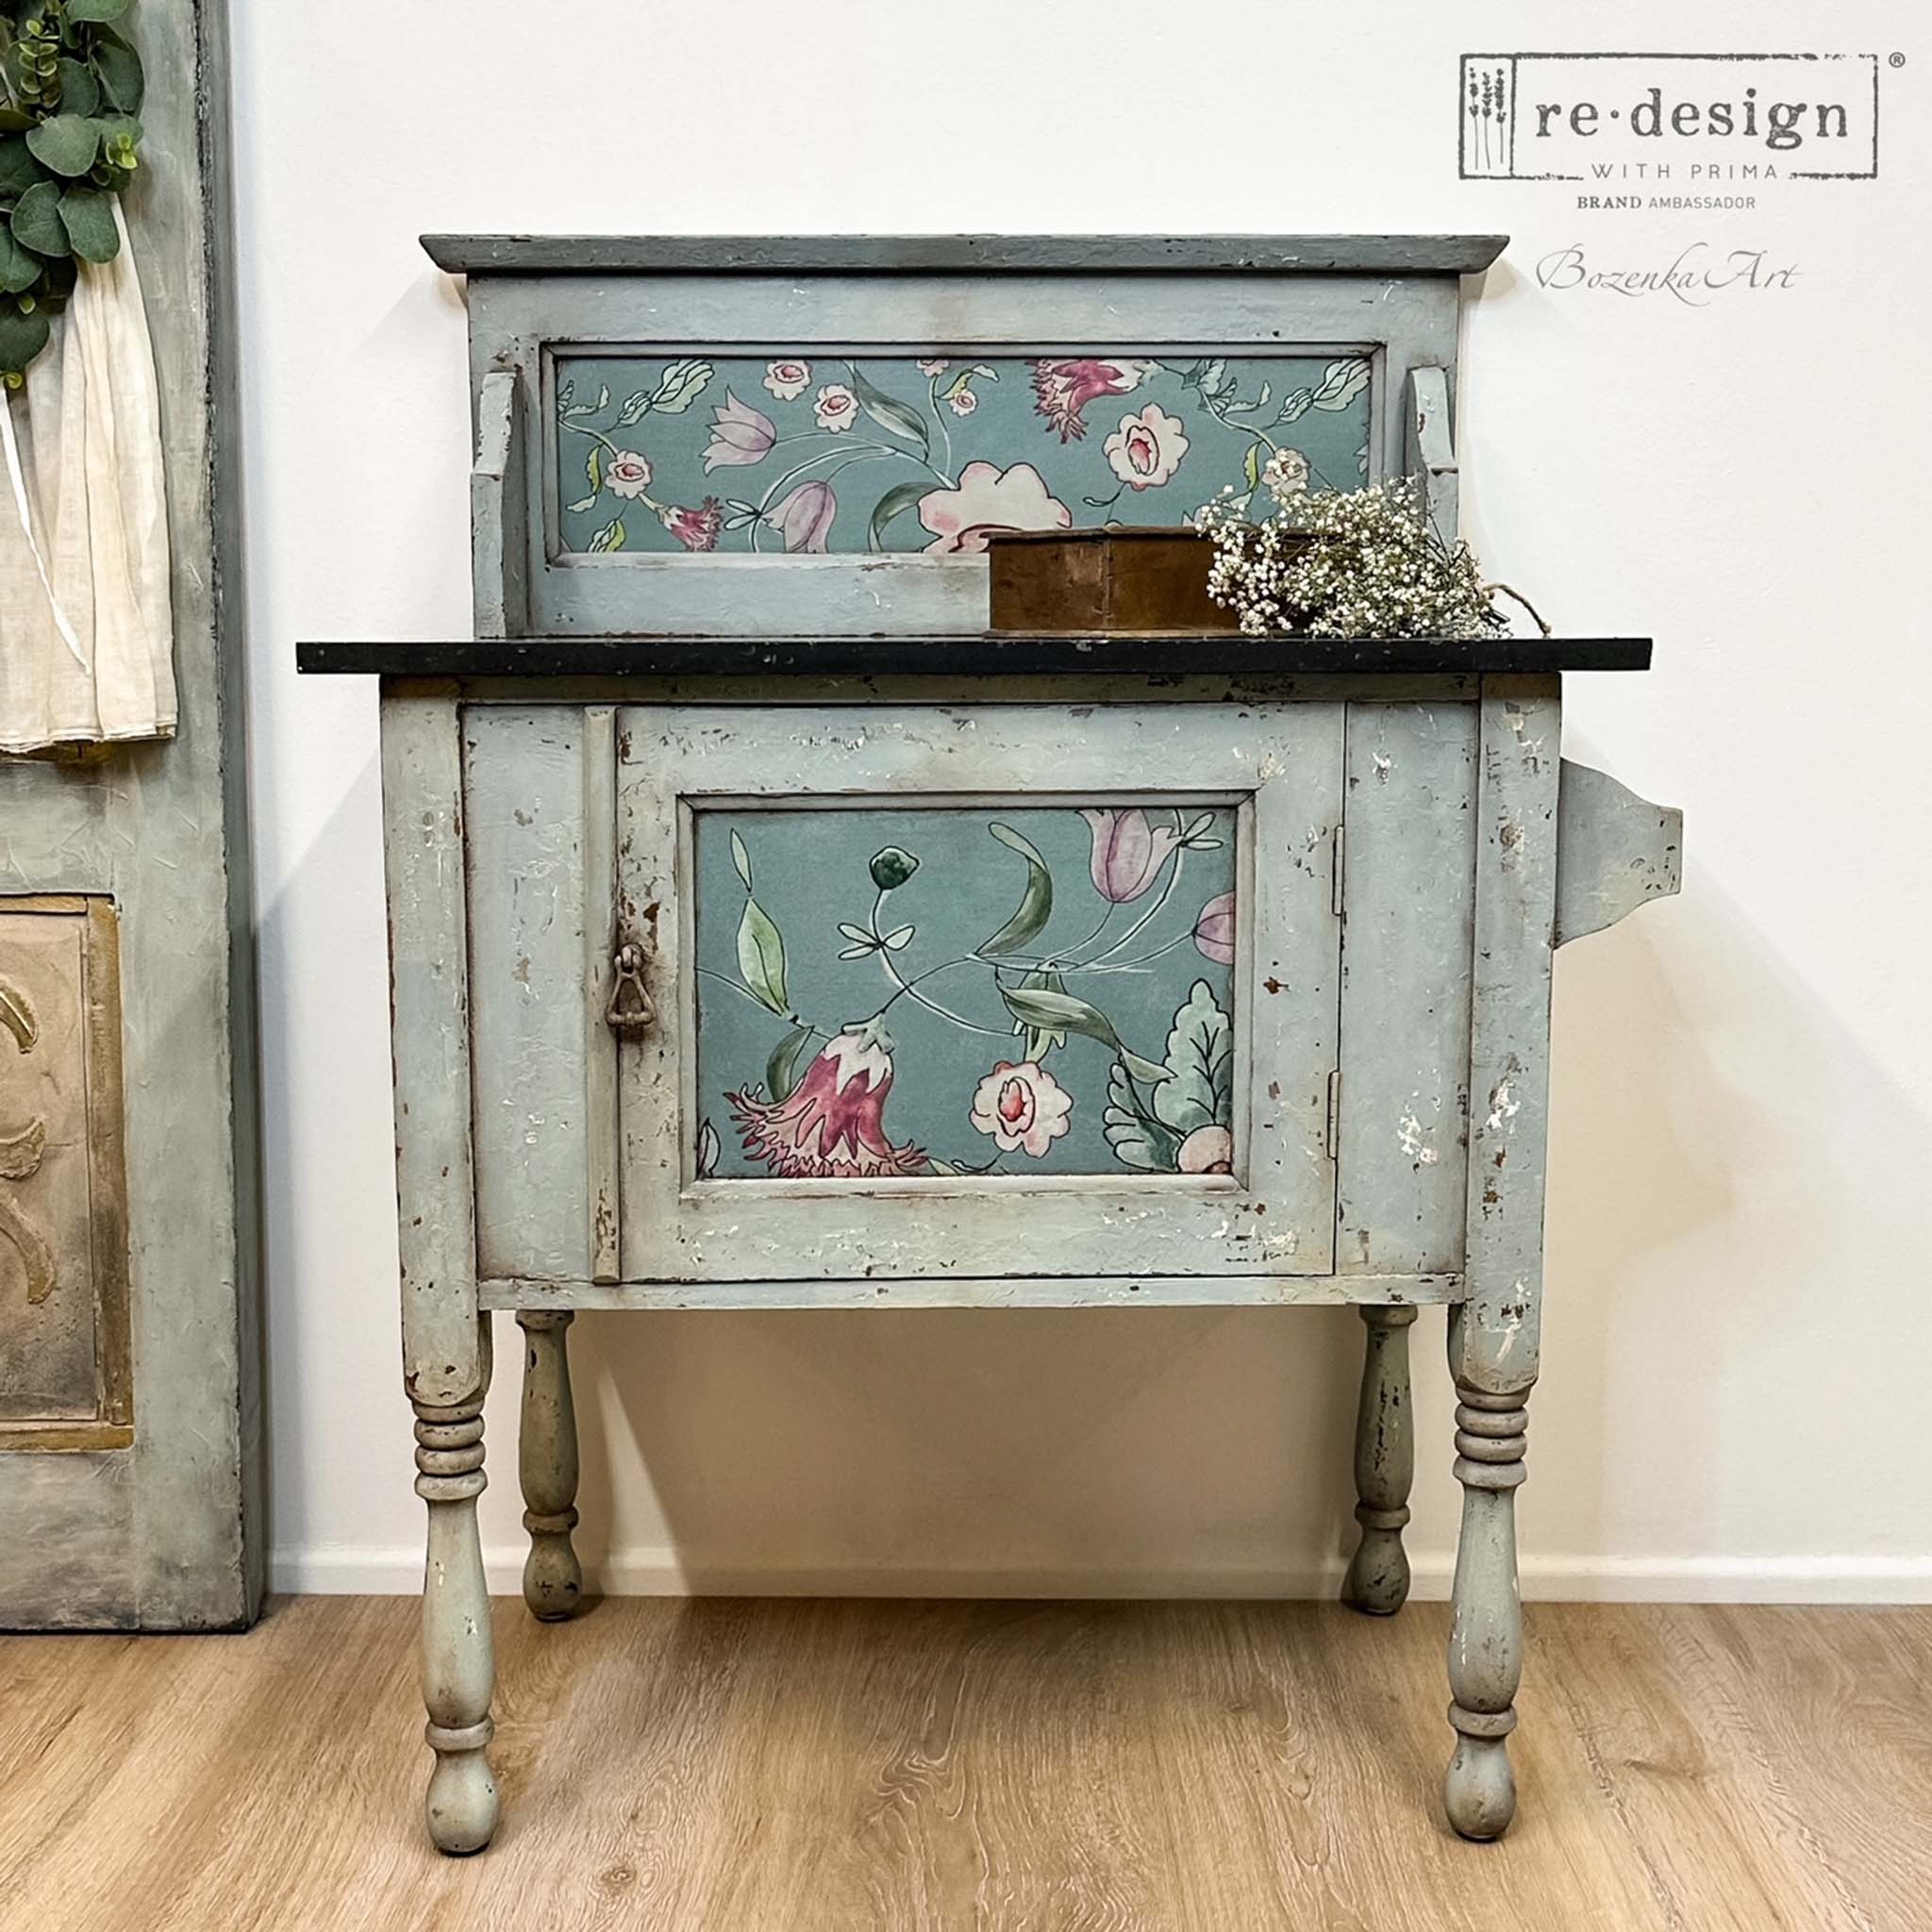 A vintage bar cart table refurbished by Bozenka Art is painted light gray and features ReDesign with Prima's Swedish Posy A1 Fiber Paper by Annie Sloan on it.